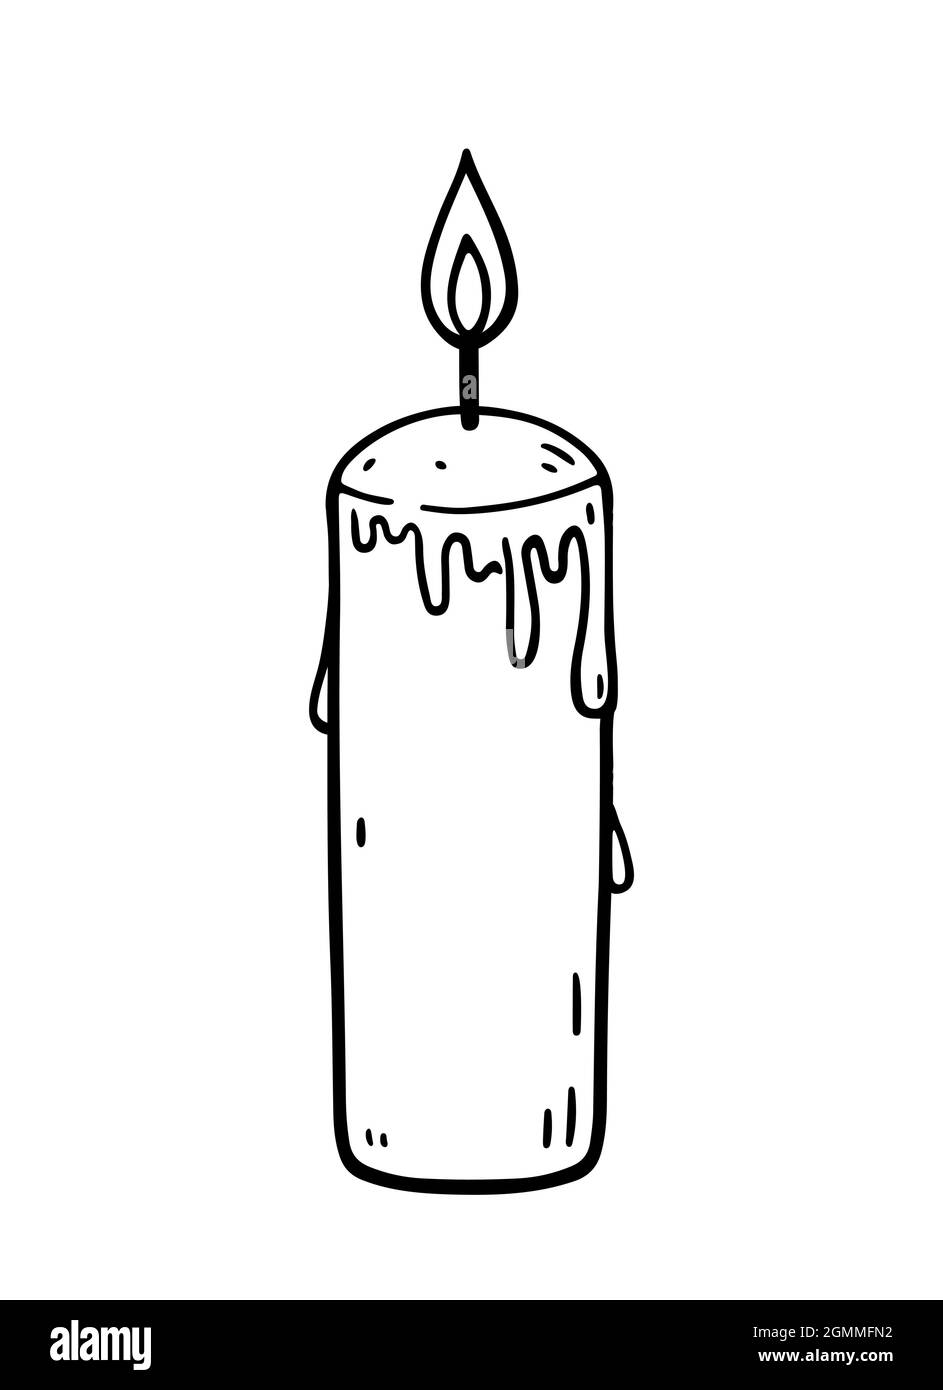 Burning candle with dripping wax isolated on white background. Vector hand-drawn illustration in doodle style. Perfect for cards, logo, holiday designs, decorations. Stock Vector